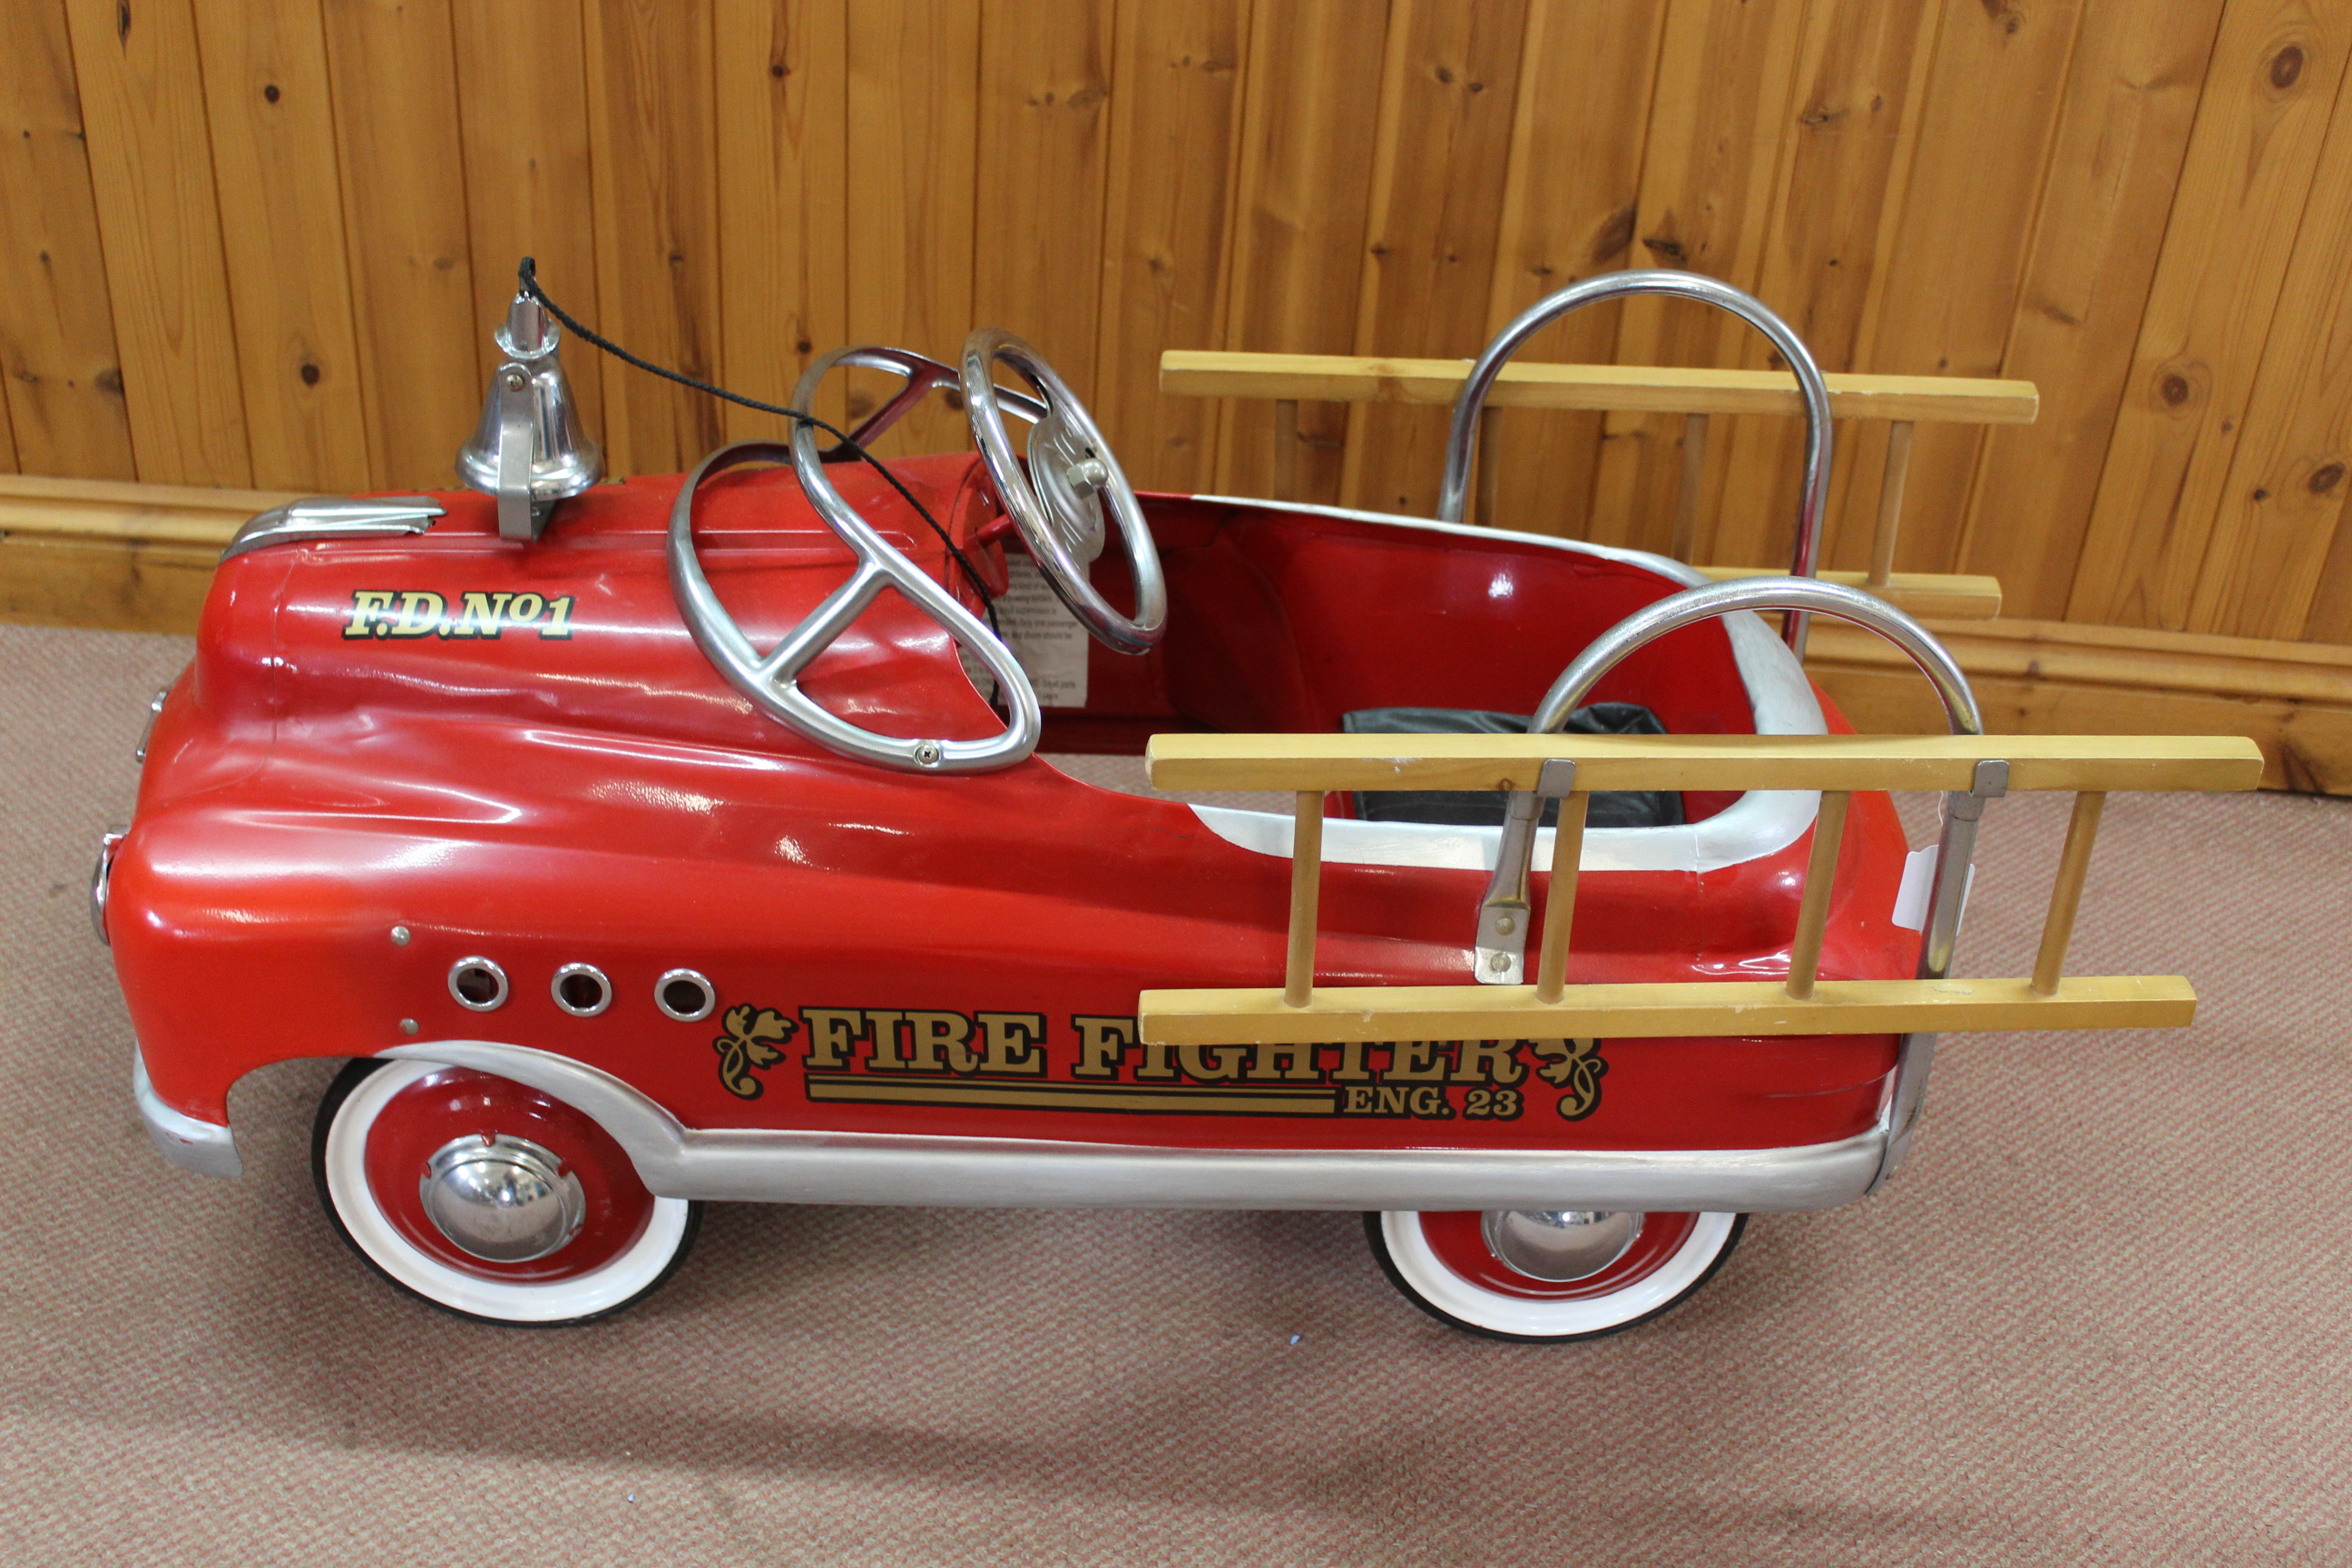 A 1950's style fire fighter Eng 23 F.D. No.